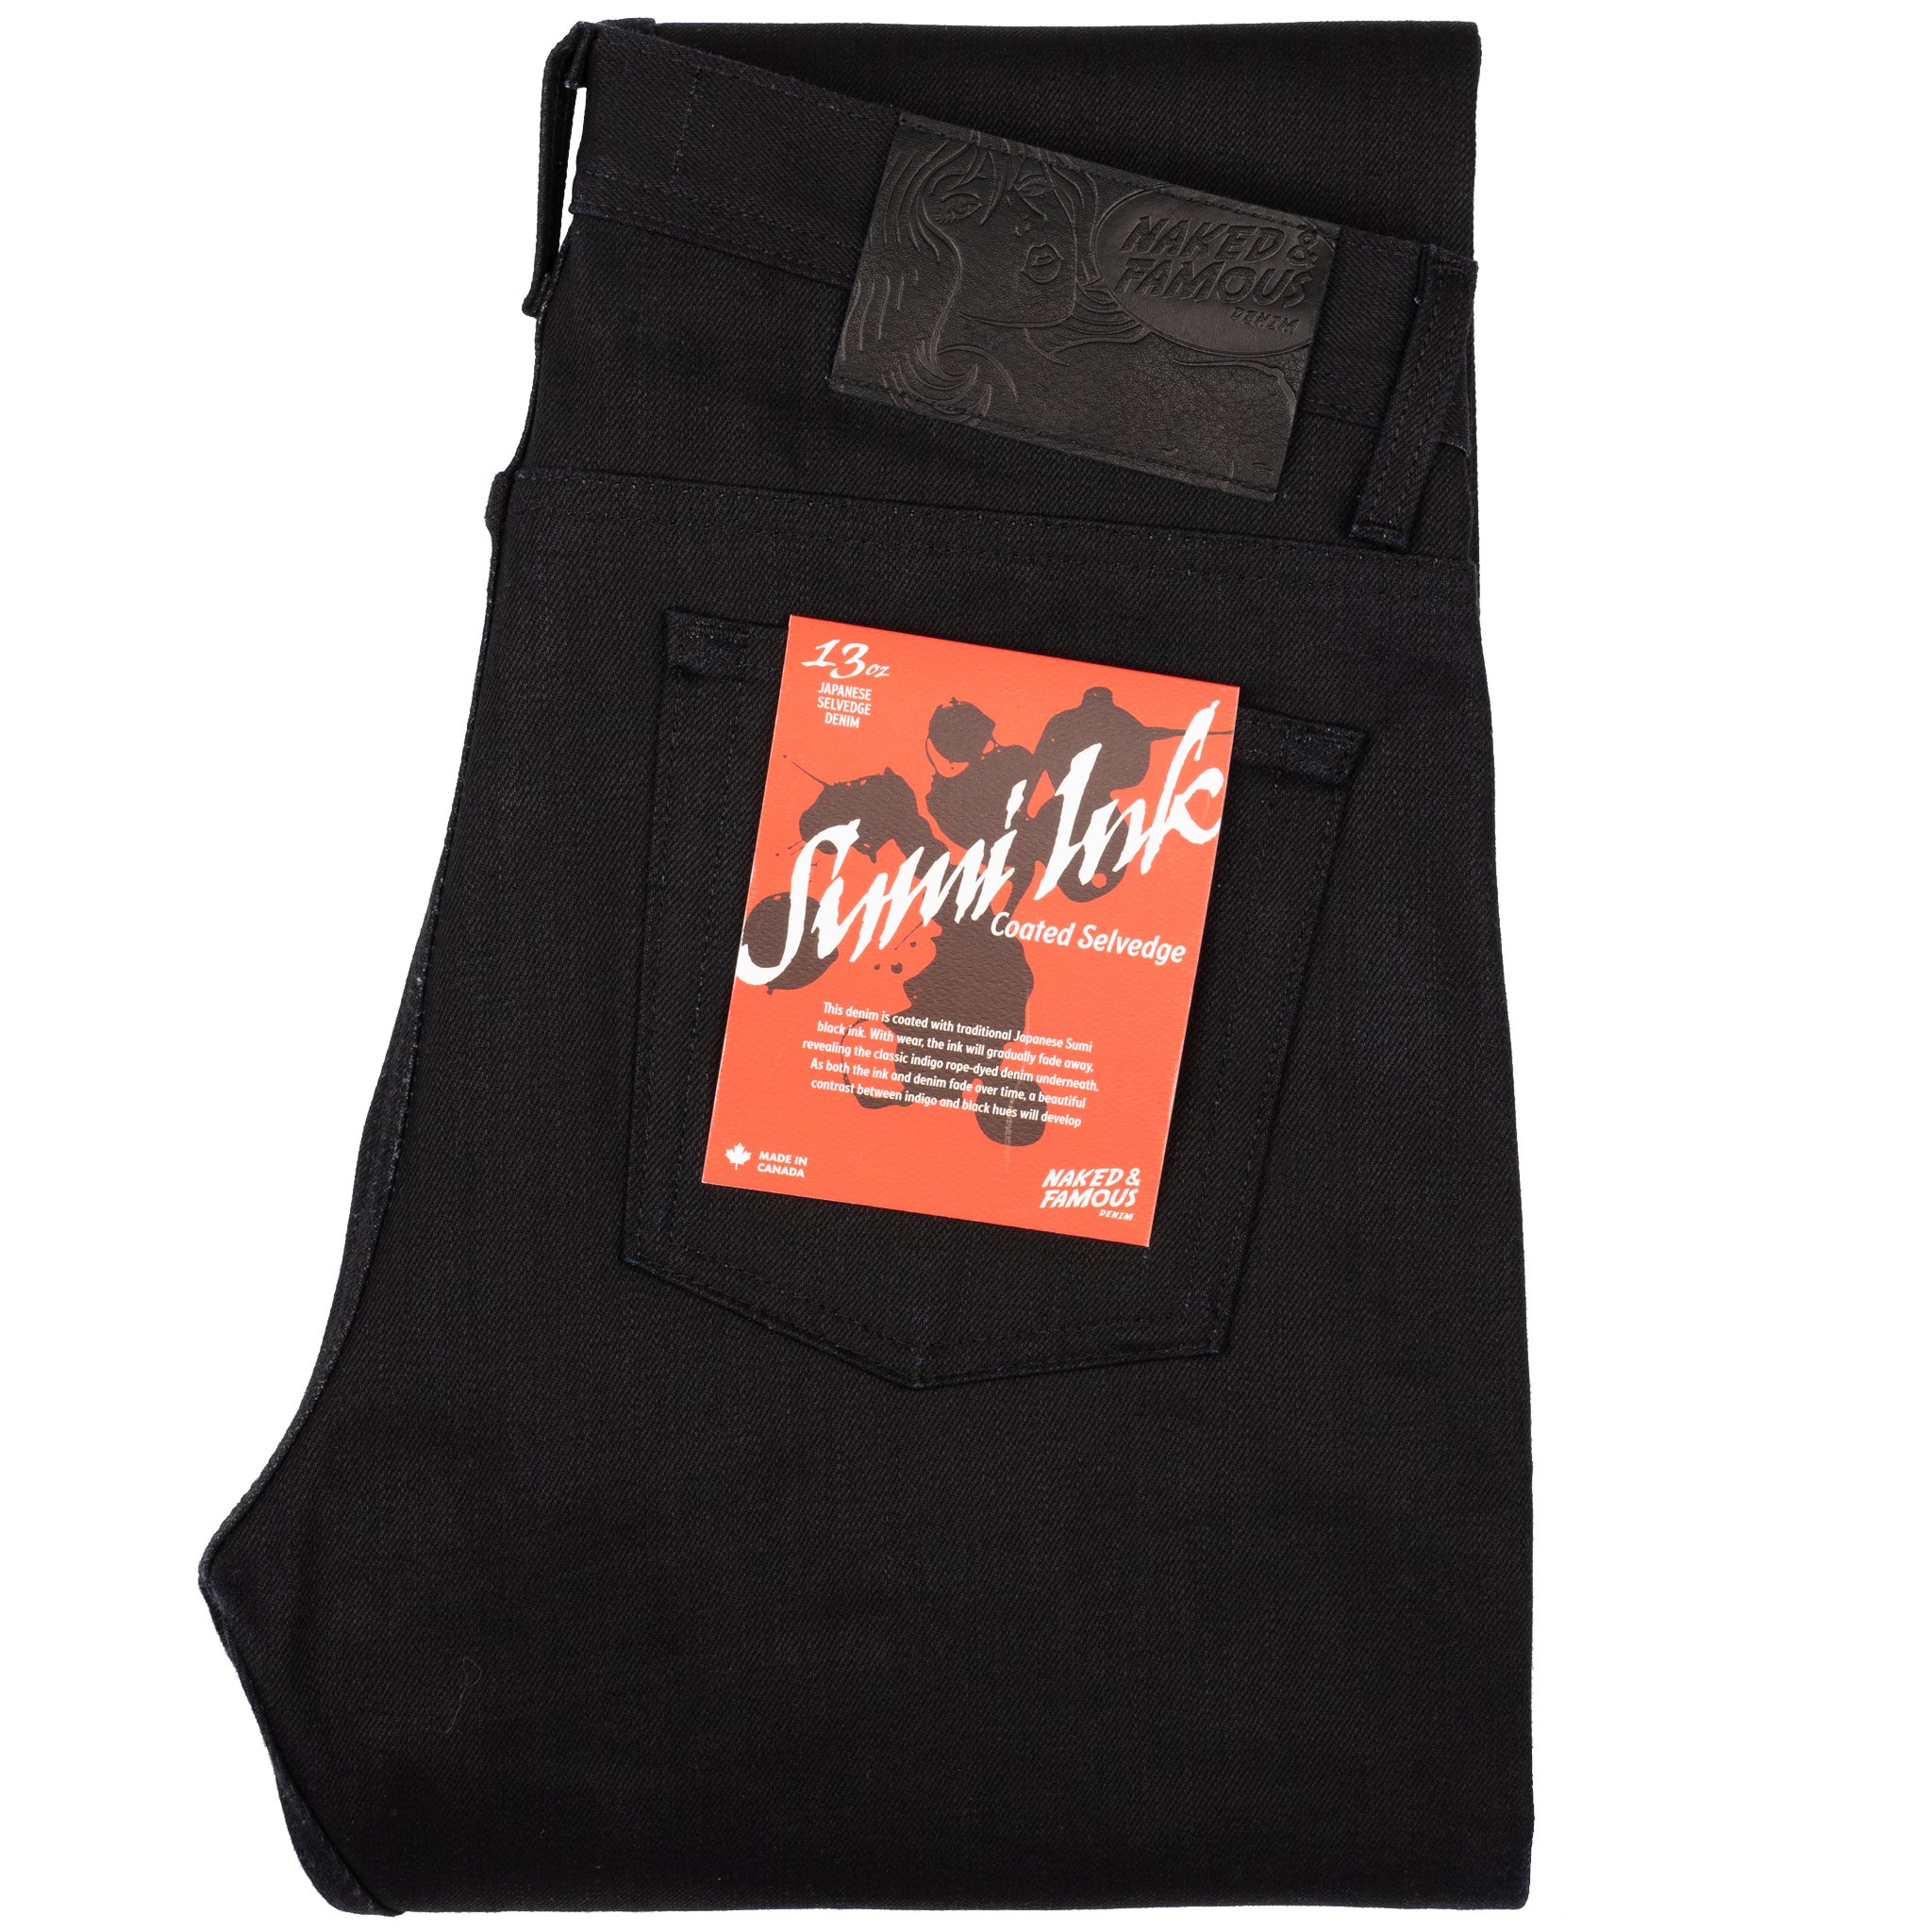  Sumi Ink Coated Selvedge - Jeans 